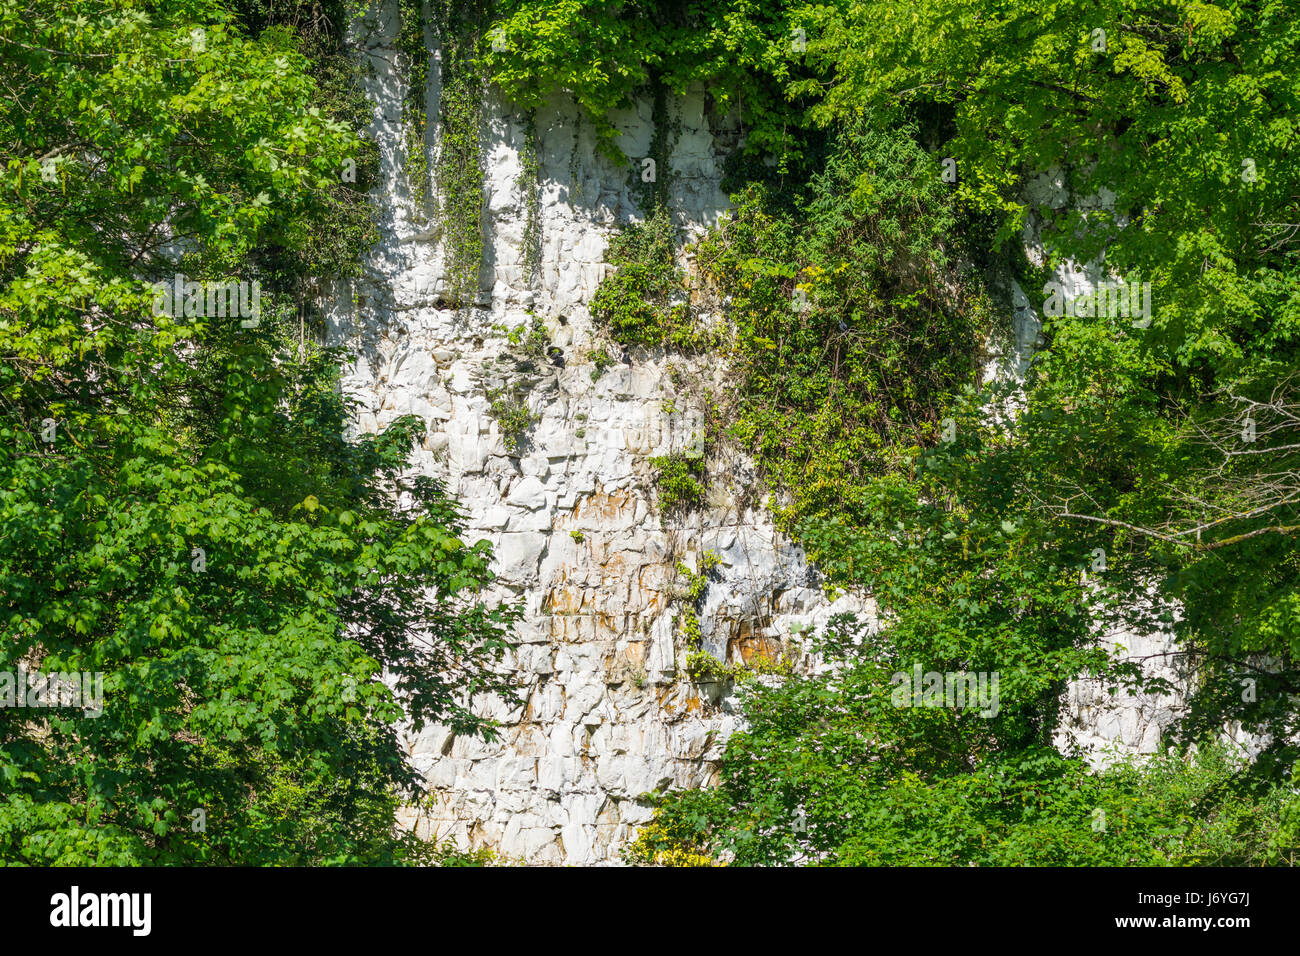 Inland chalk cliff face with surrounding vegetation. Stock Photo